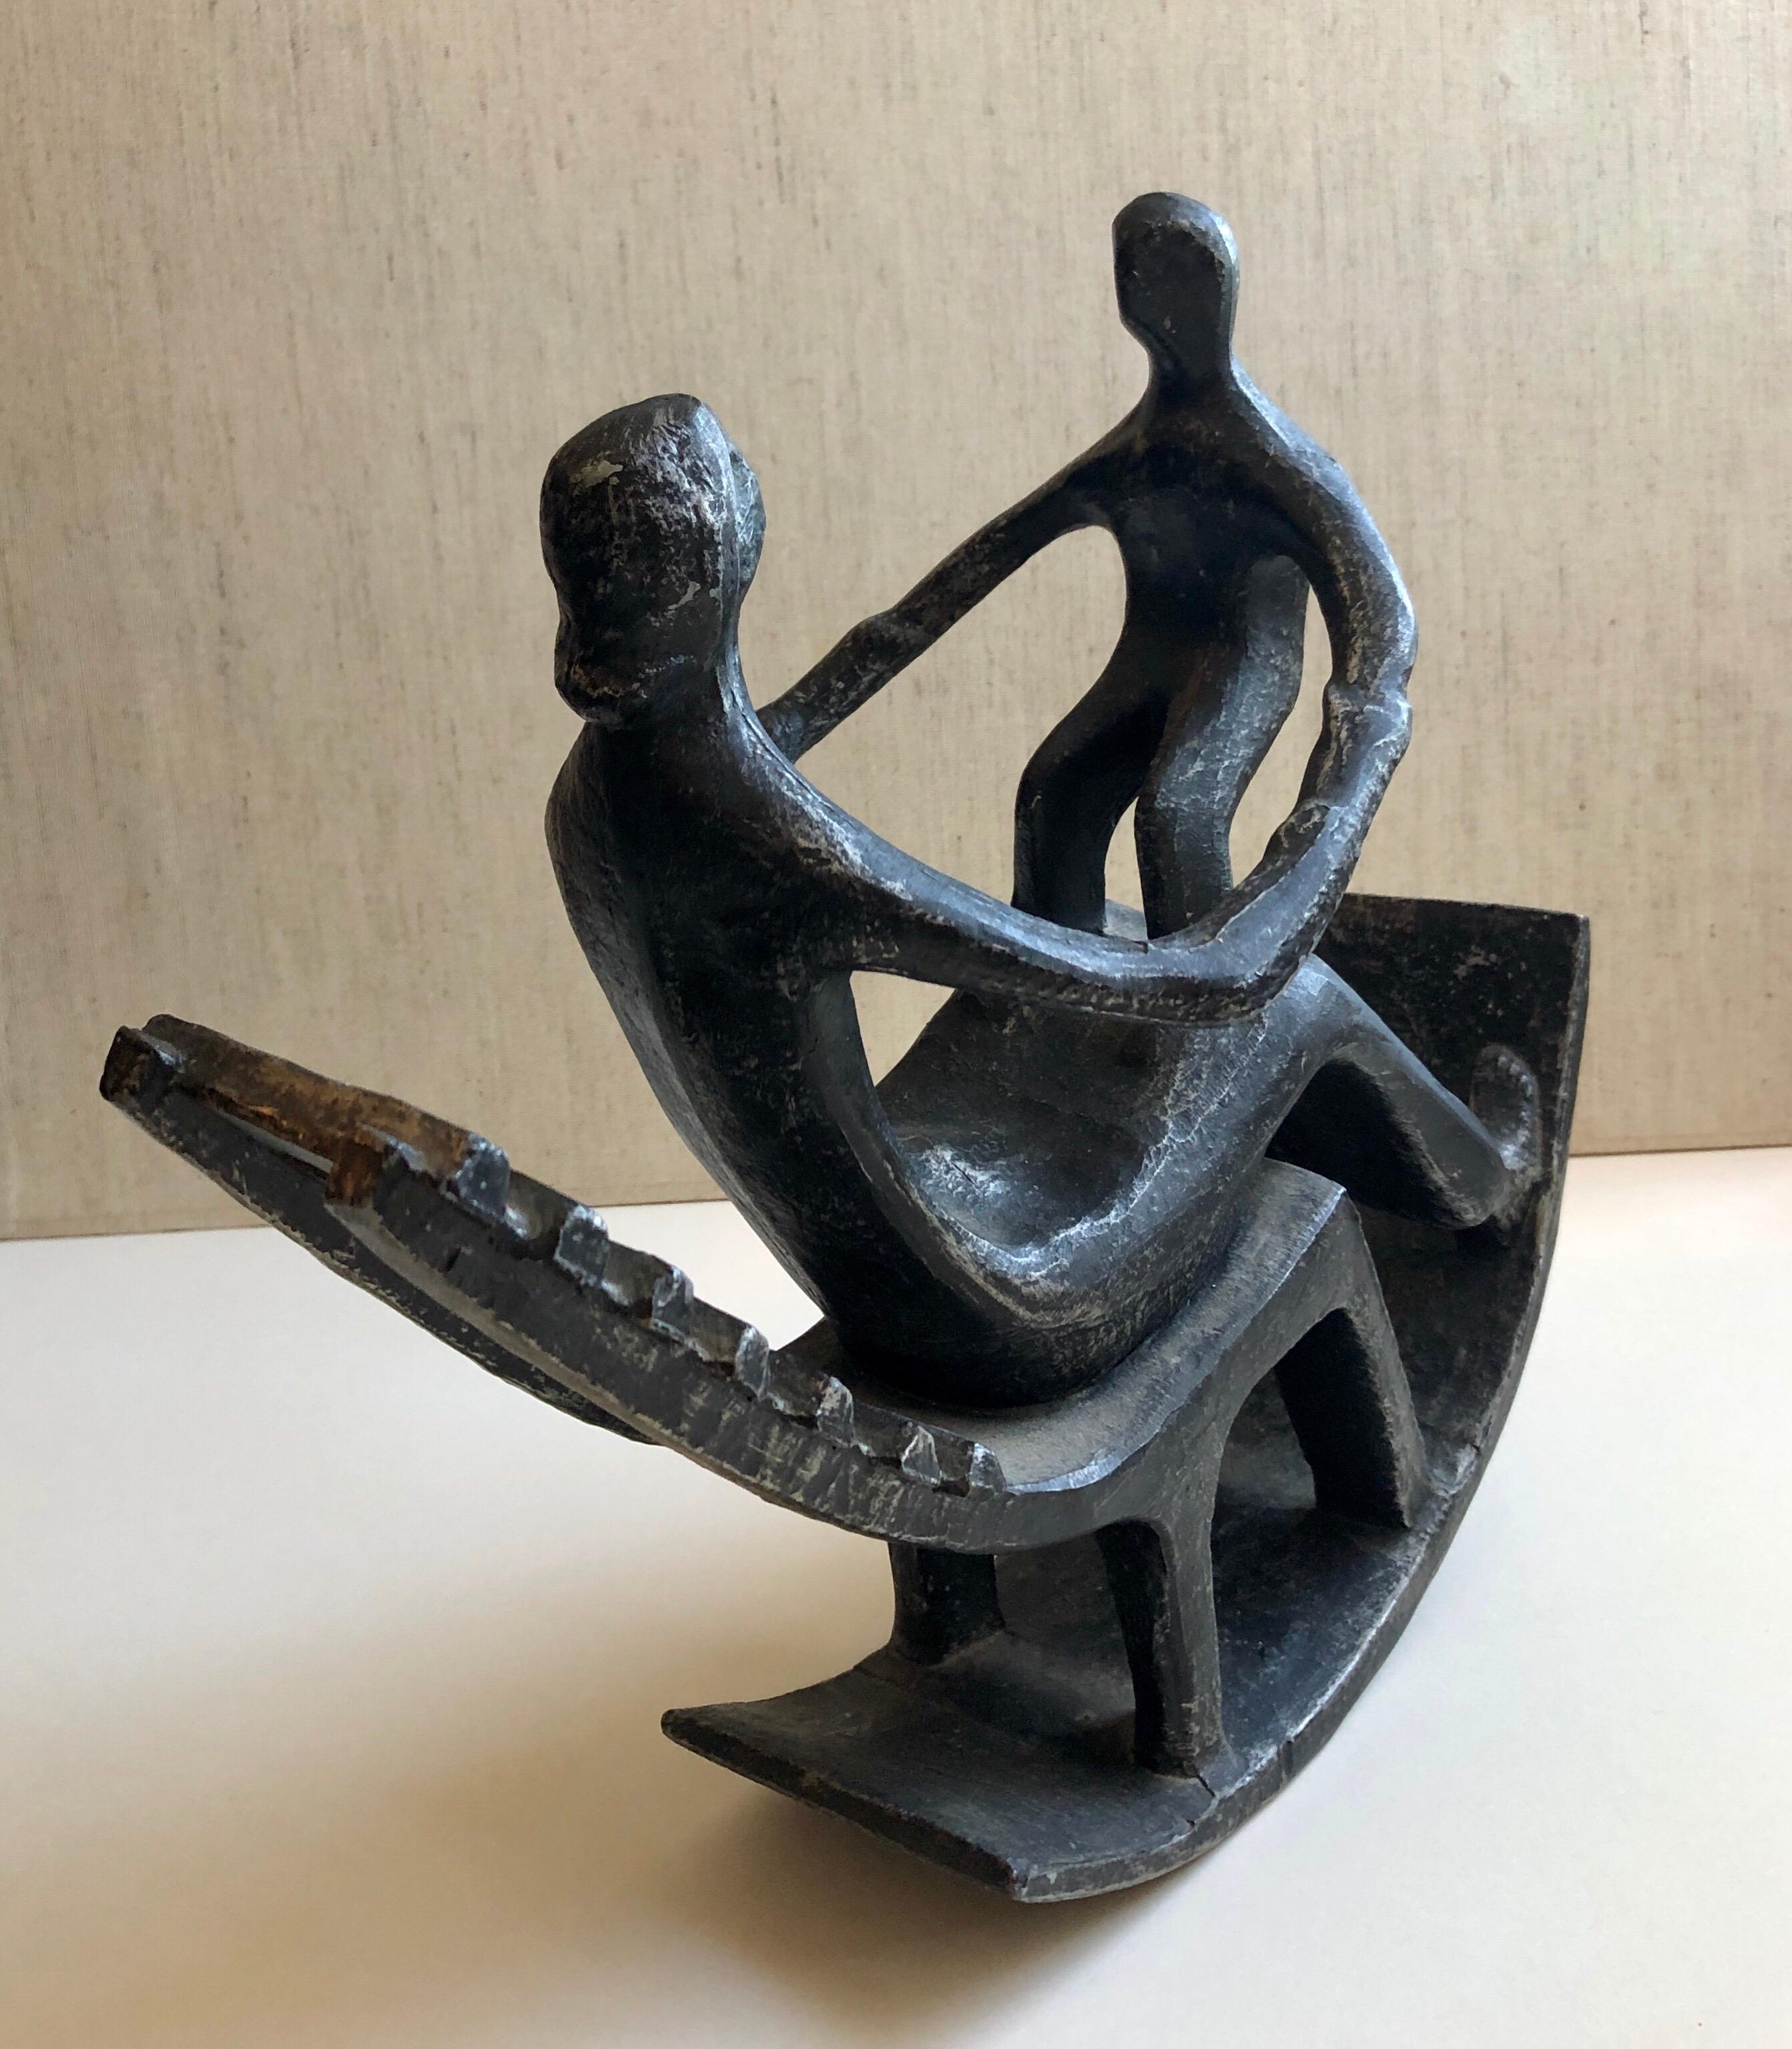 This is a cast metal sculpture of a woman and child, mother and baby in a rocking chair. It has a patina on a white metal. Not sure if it is steel or aluminum. It is and older vintage piece and has wear to patina where it sits and rocks on table. It